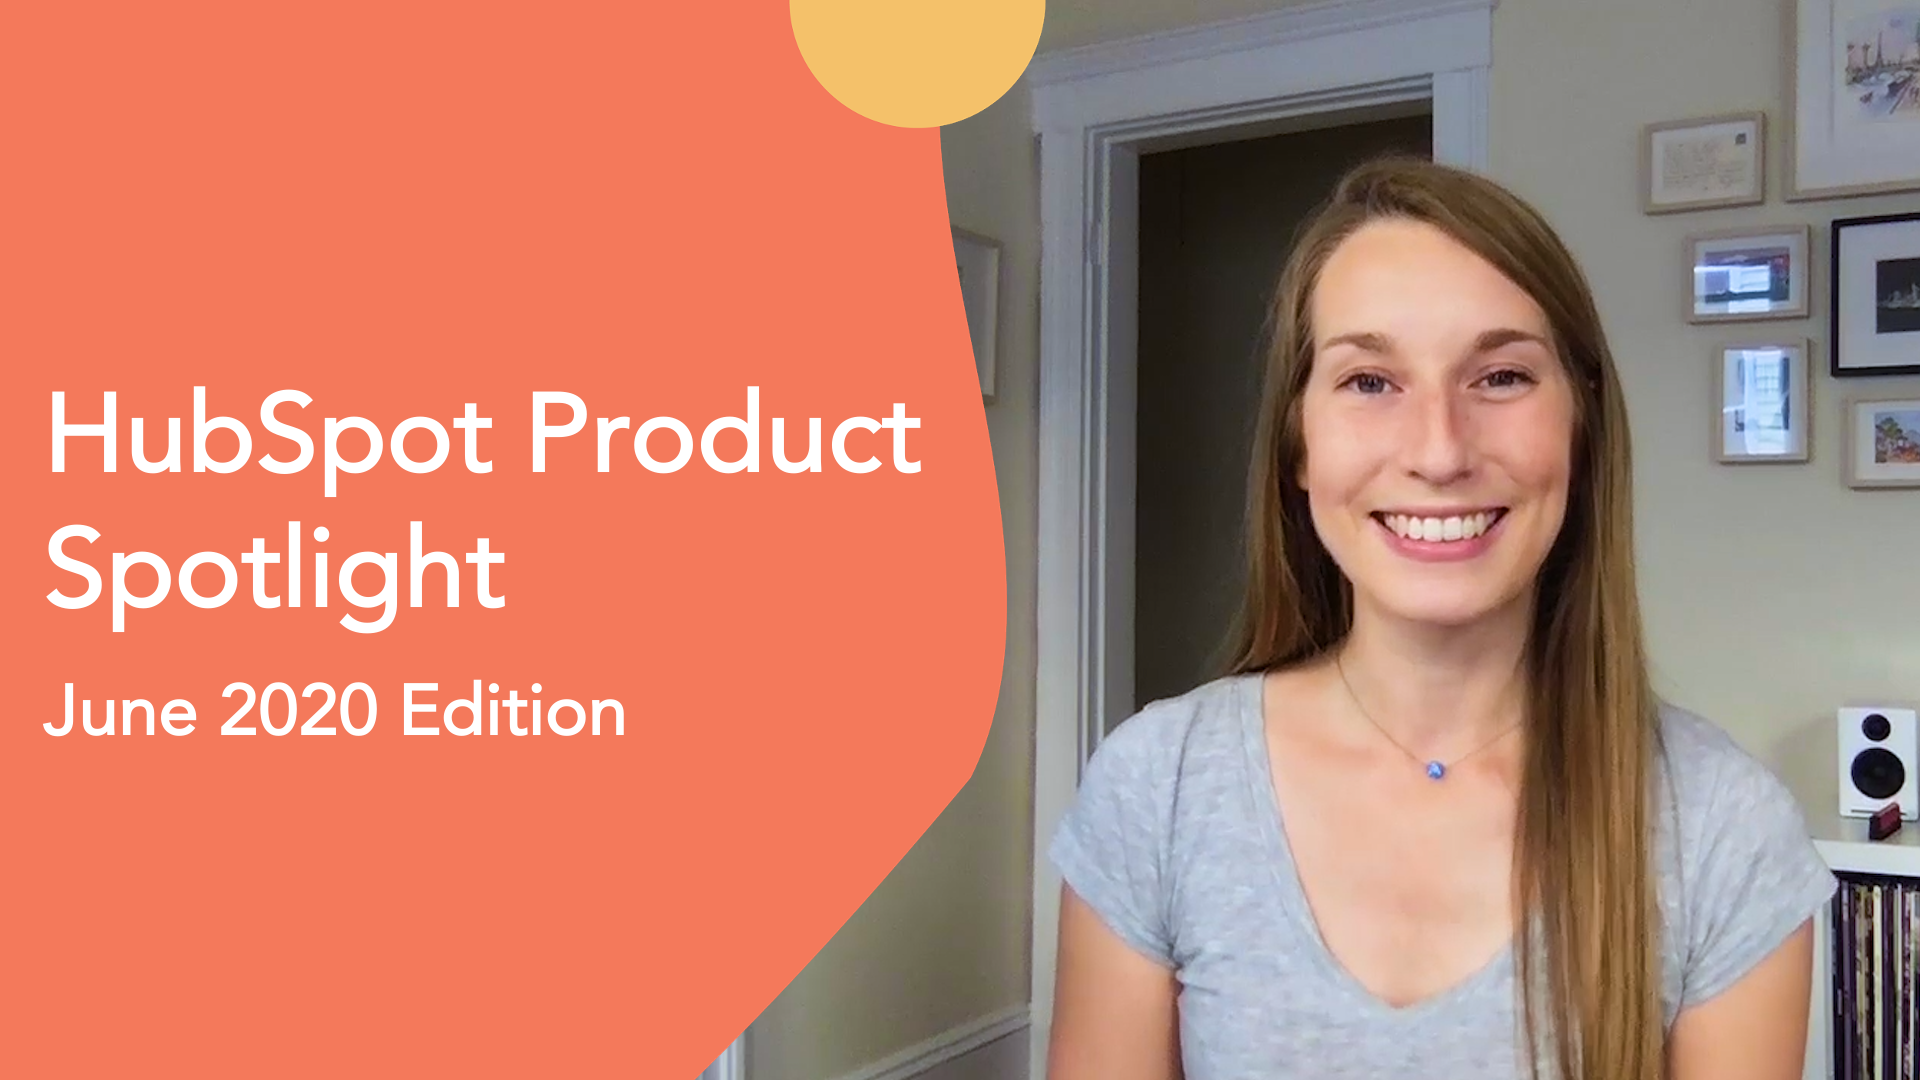 Photo of a woman with a graphic that reads "HubSpot Product Spotlight, June 2020 Edition"